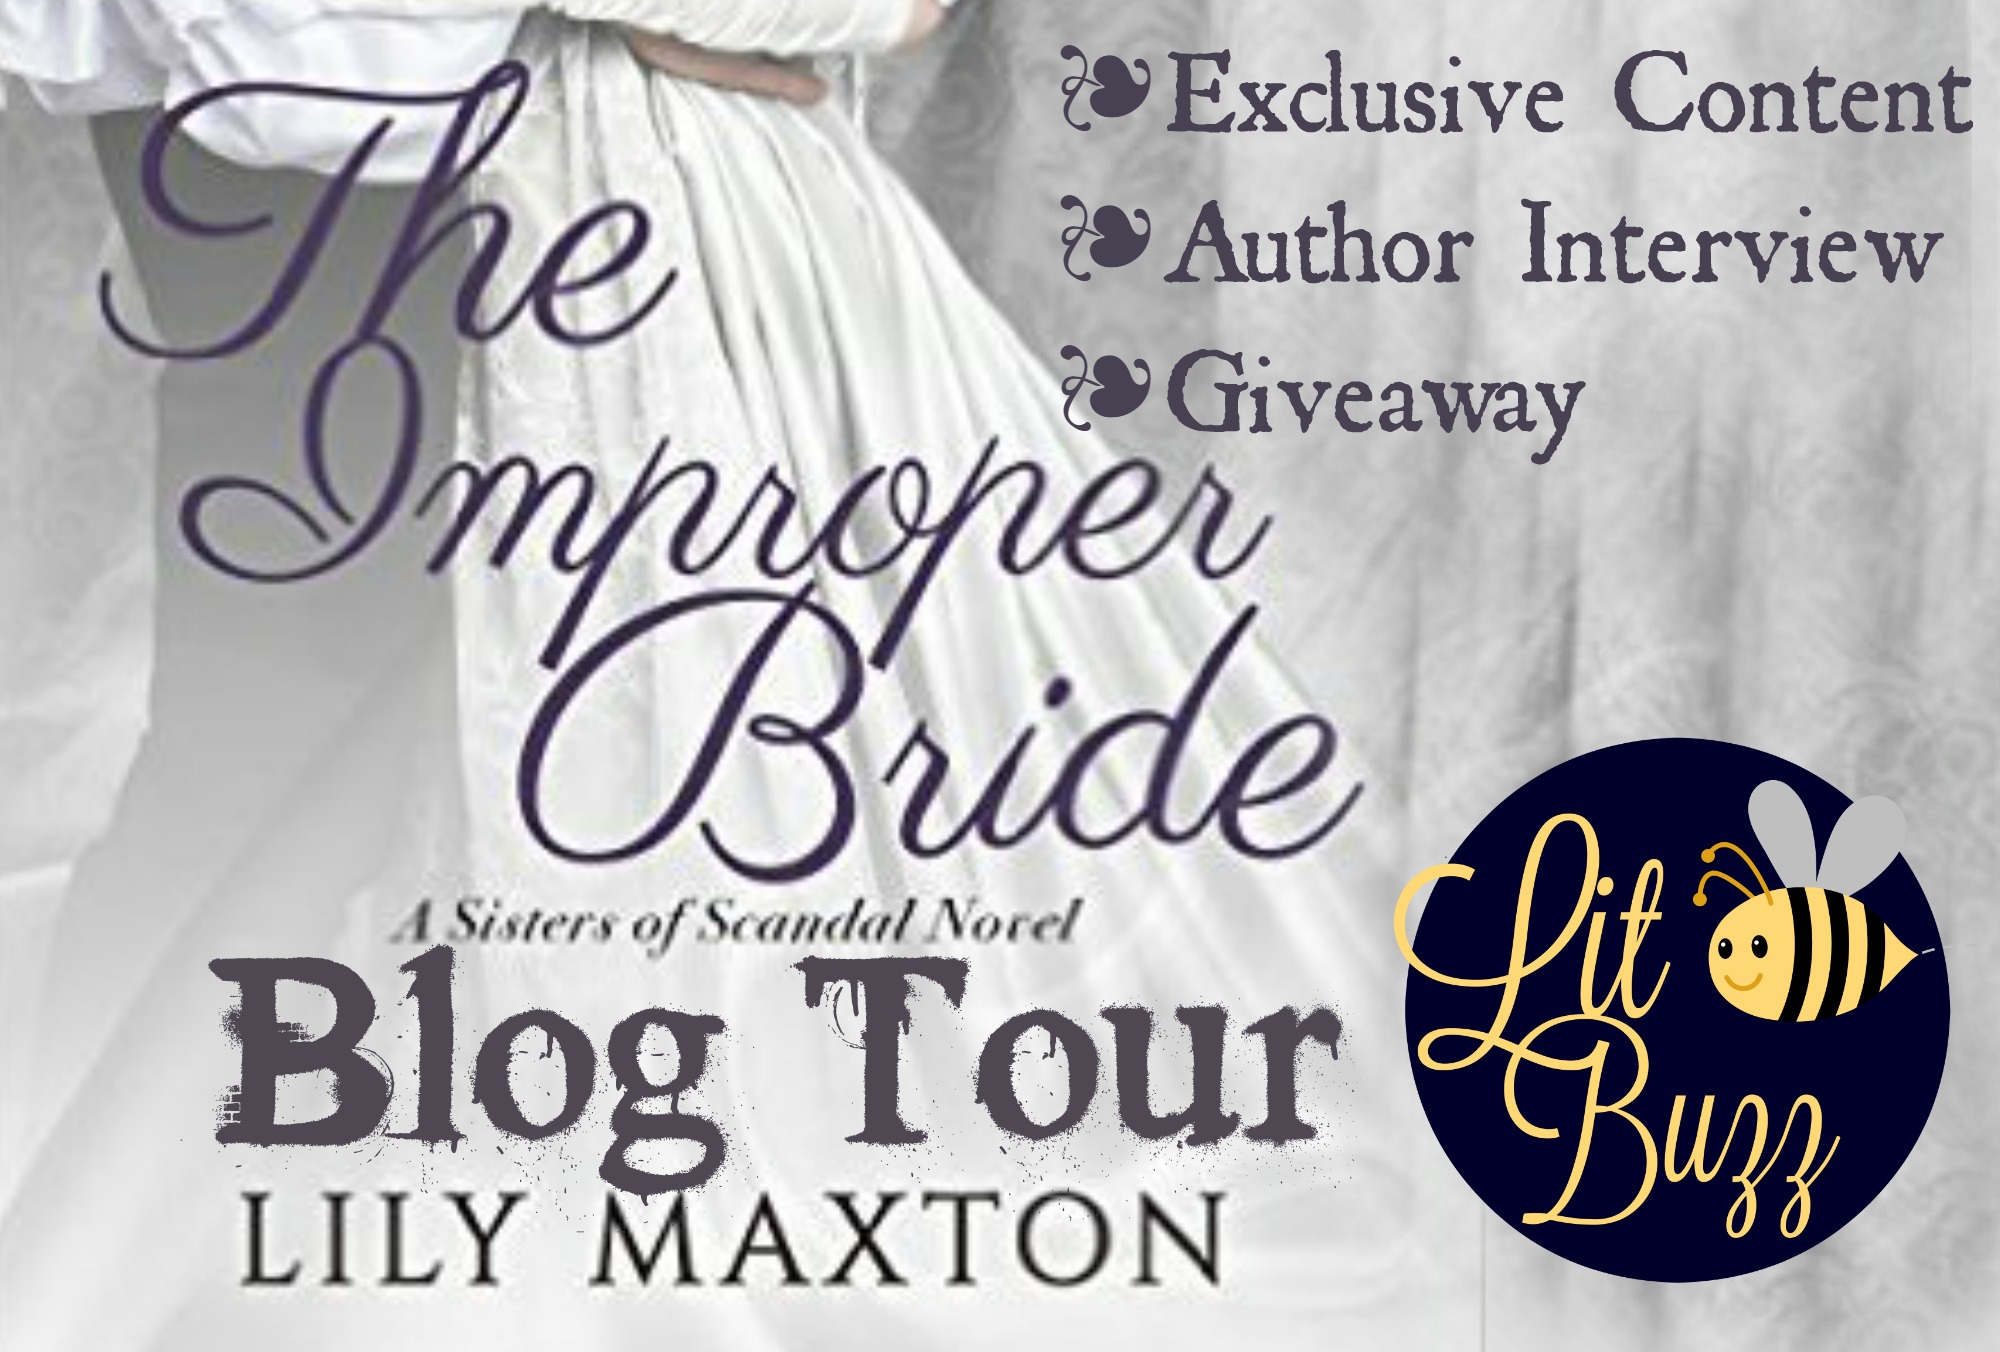 Release Day Blog Tour – Lily Maxton Stops By with The Improper Bride!